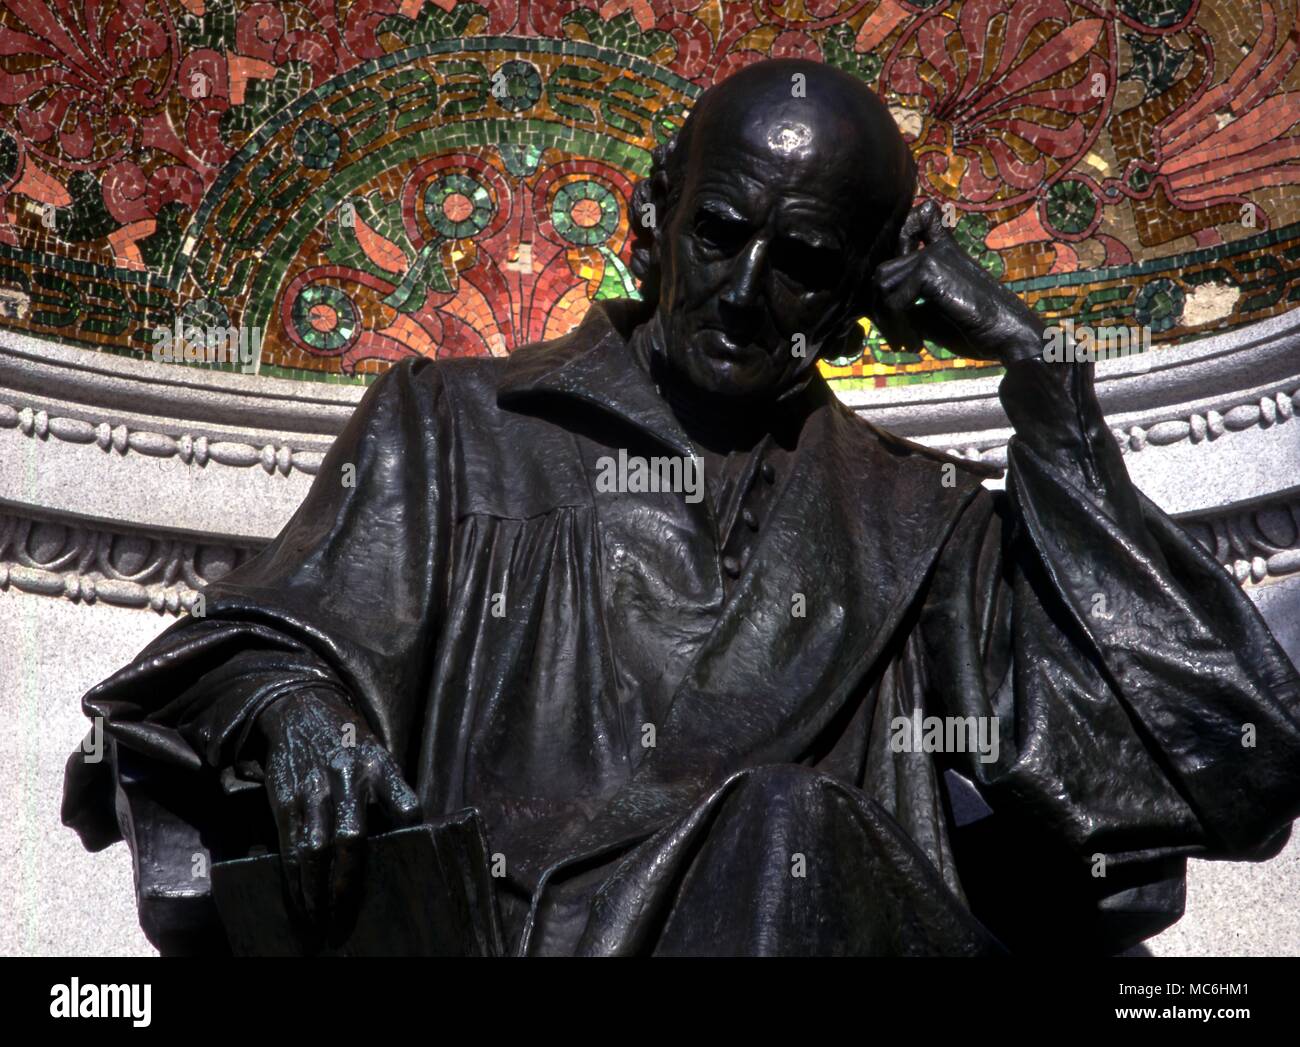 Statue of the freemason and homeopathist, Samuel Hahnemann (1755-1843), by Charles Niehaus. It is in the Scot Circle, Washington DC. USA Stock Photo